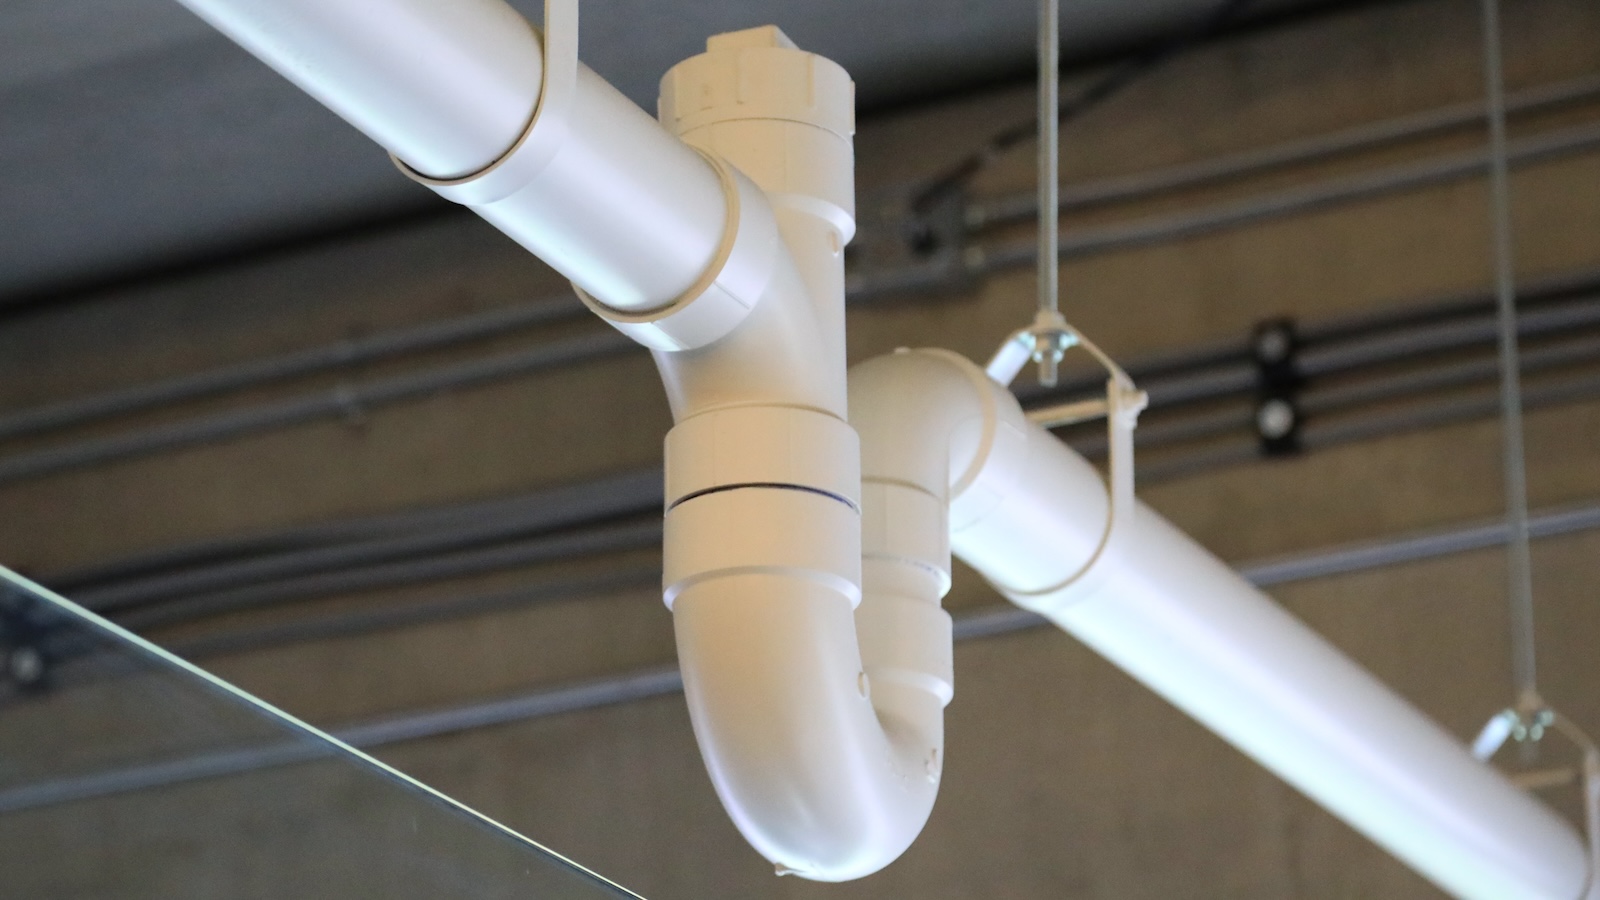 PVC pipe hanging from ceiling